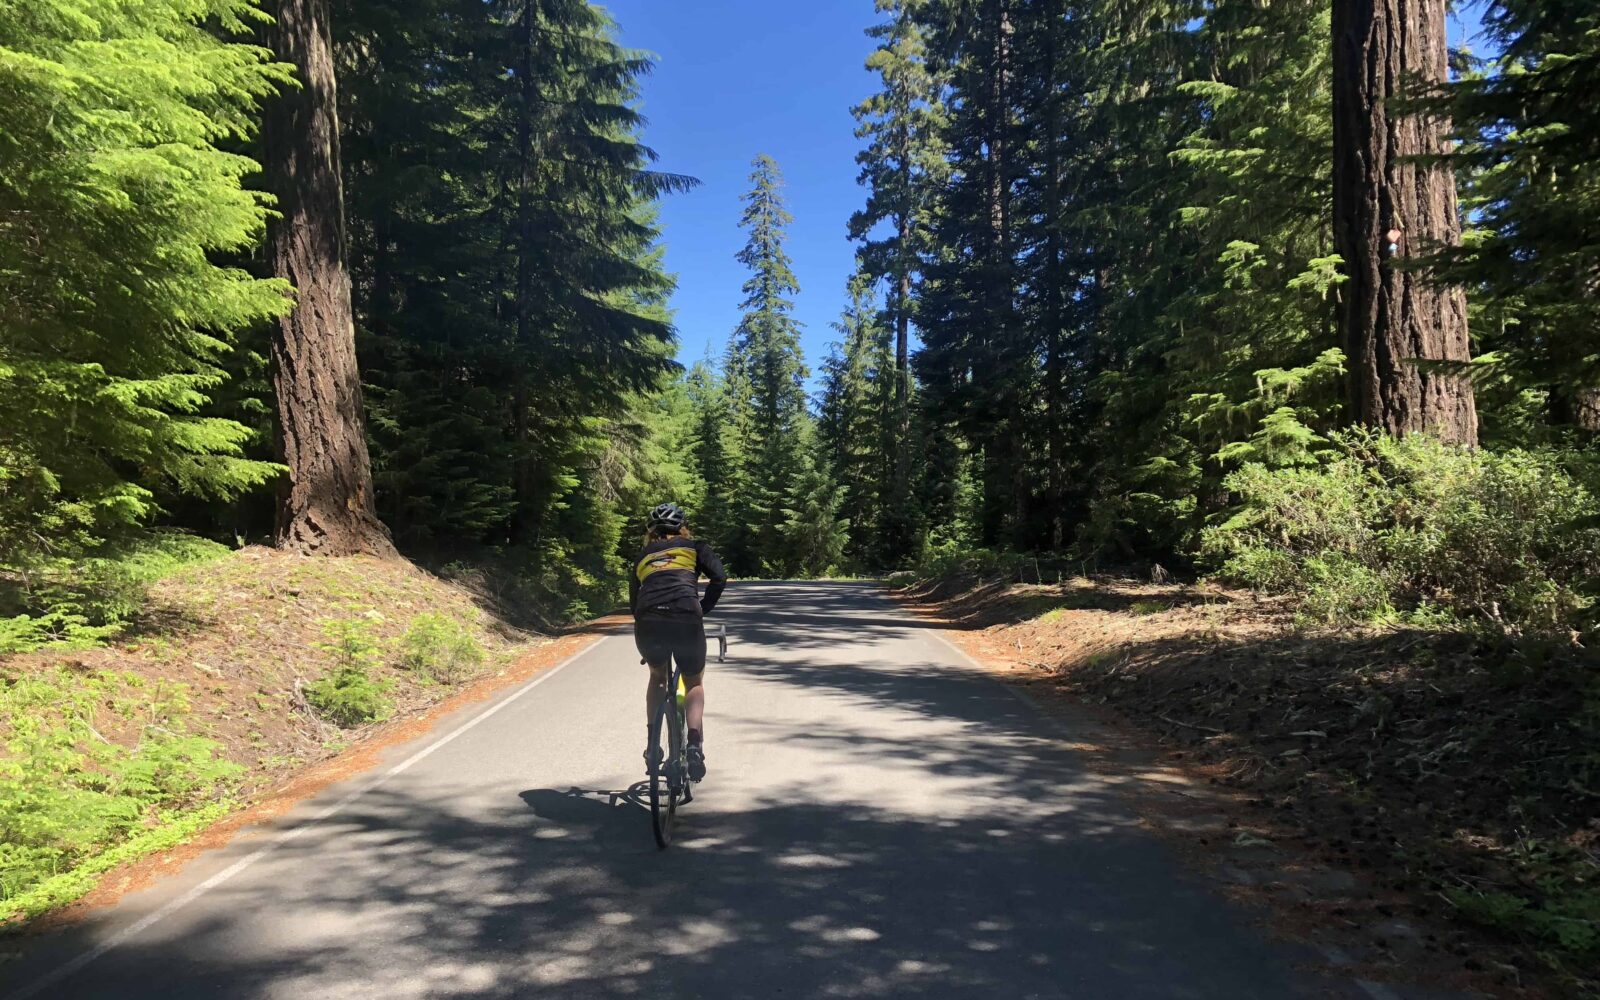 Cycling through big old trees.